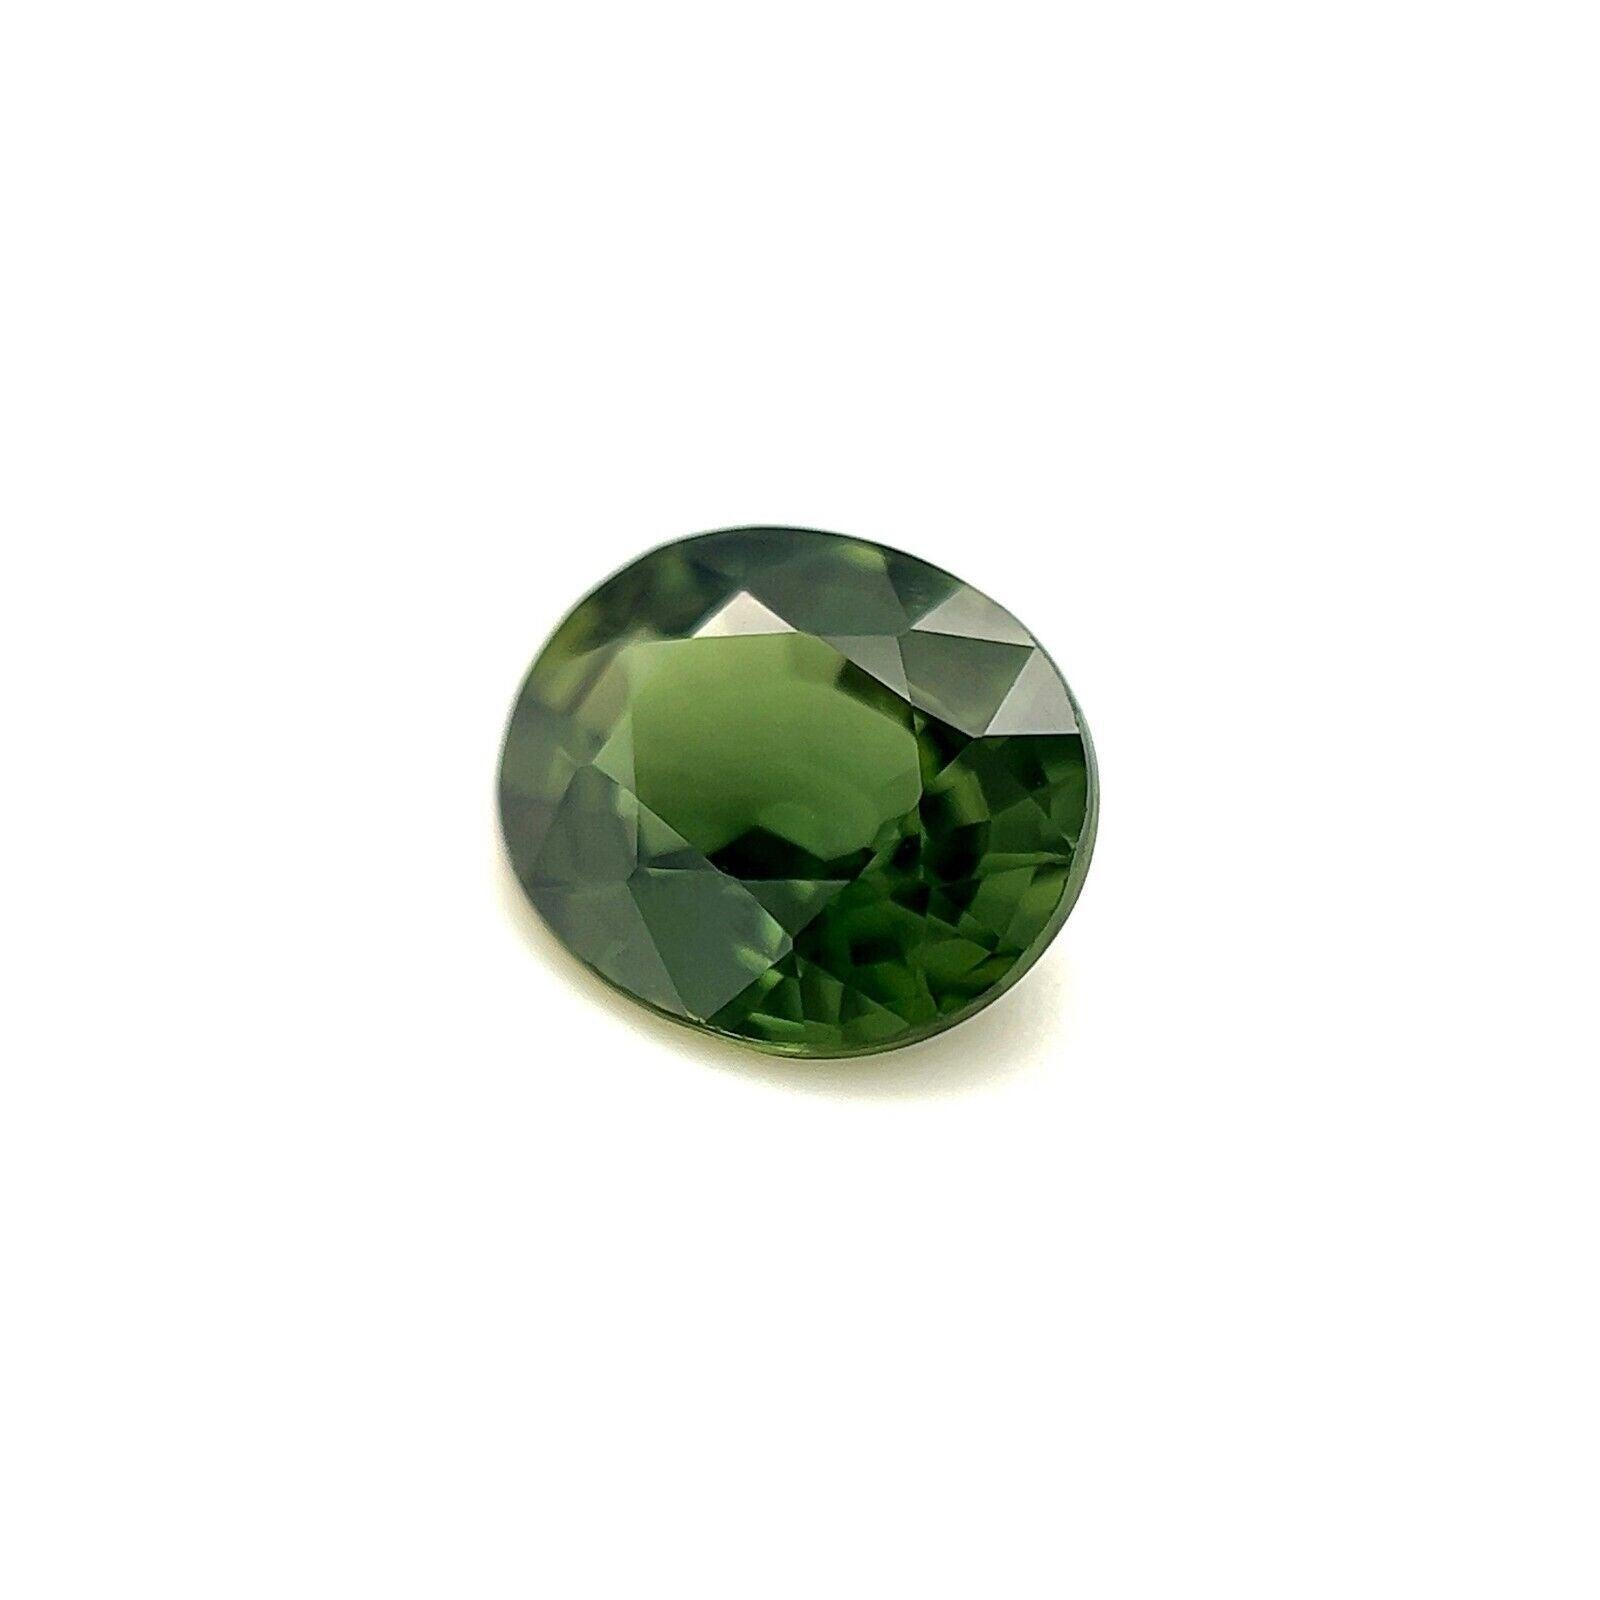 1.38ct Australian Green Sapphire Oval Cut Rare Loose Gem 7.3x6mm

Natural Green Australian Sapphire Gemstone.
1.38 Carat with a beautiful green colour and very good clarity. Also has an excellent cut and polish to show great shine and colour, would